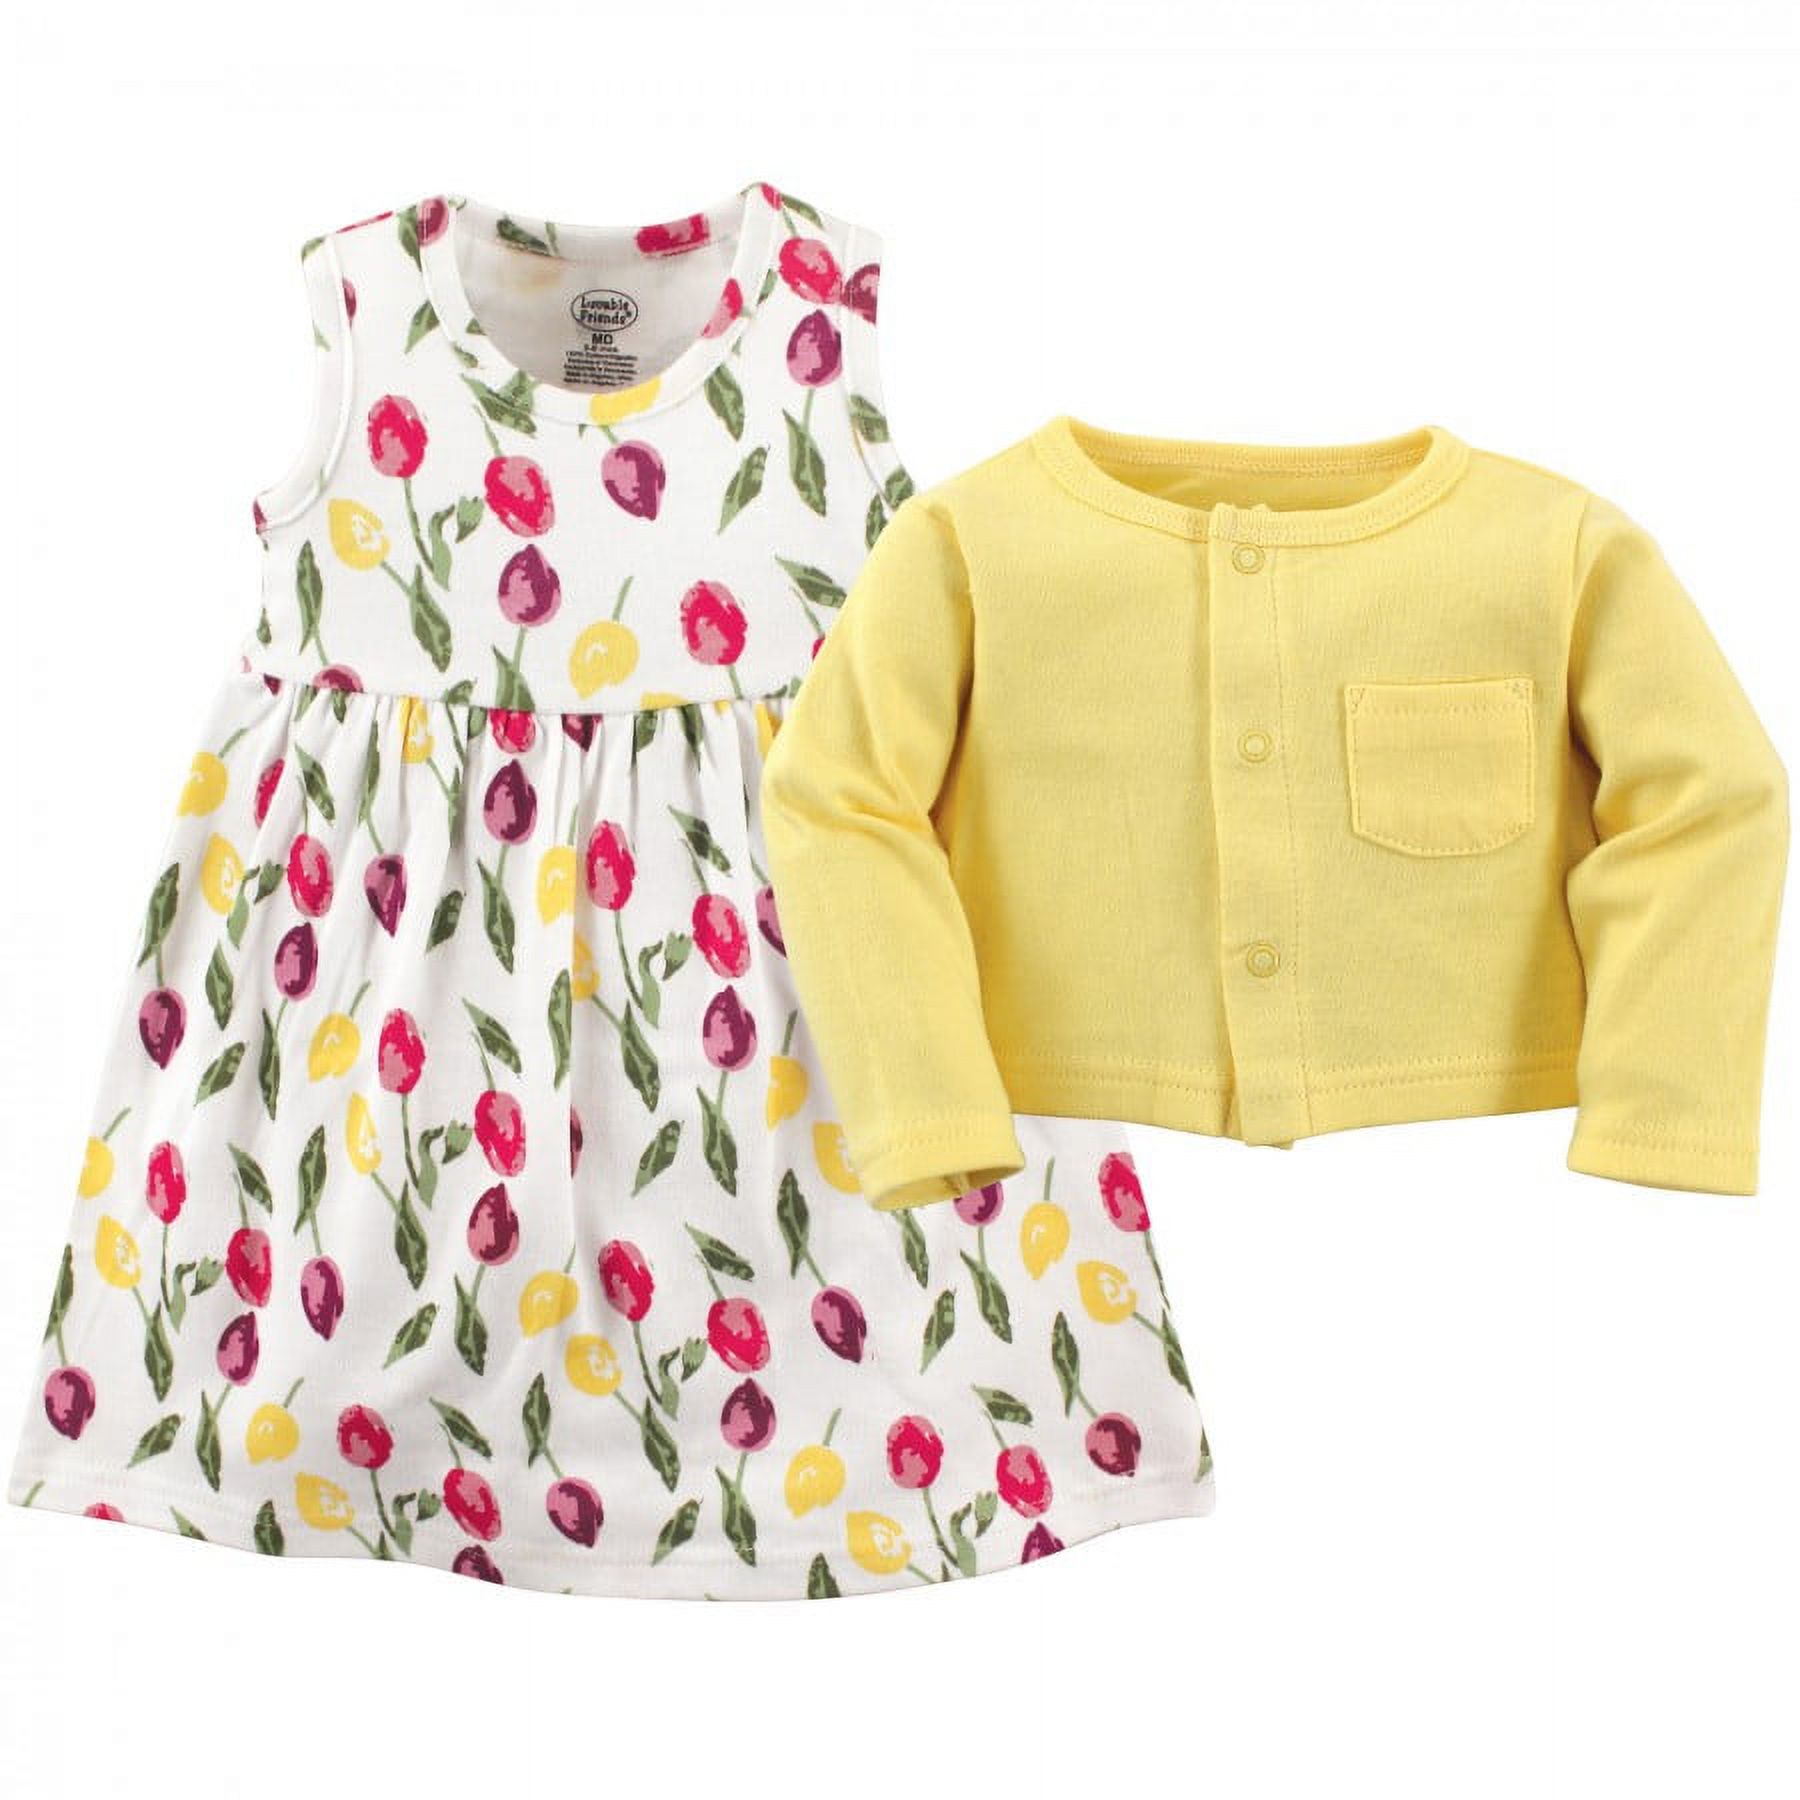 Luvable Friends Baby and Toddler Girl Dress and Cardigan 2pc Set, Tulips, 18-24 Months - image 2 of 2